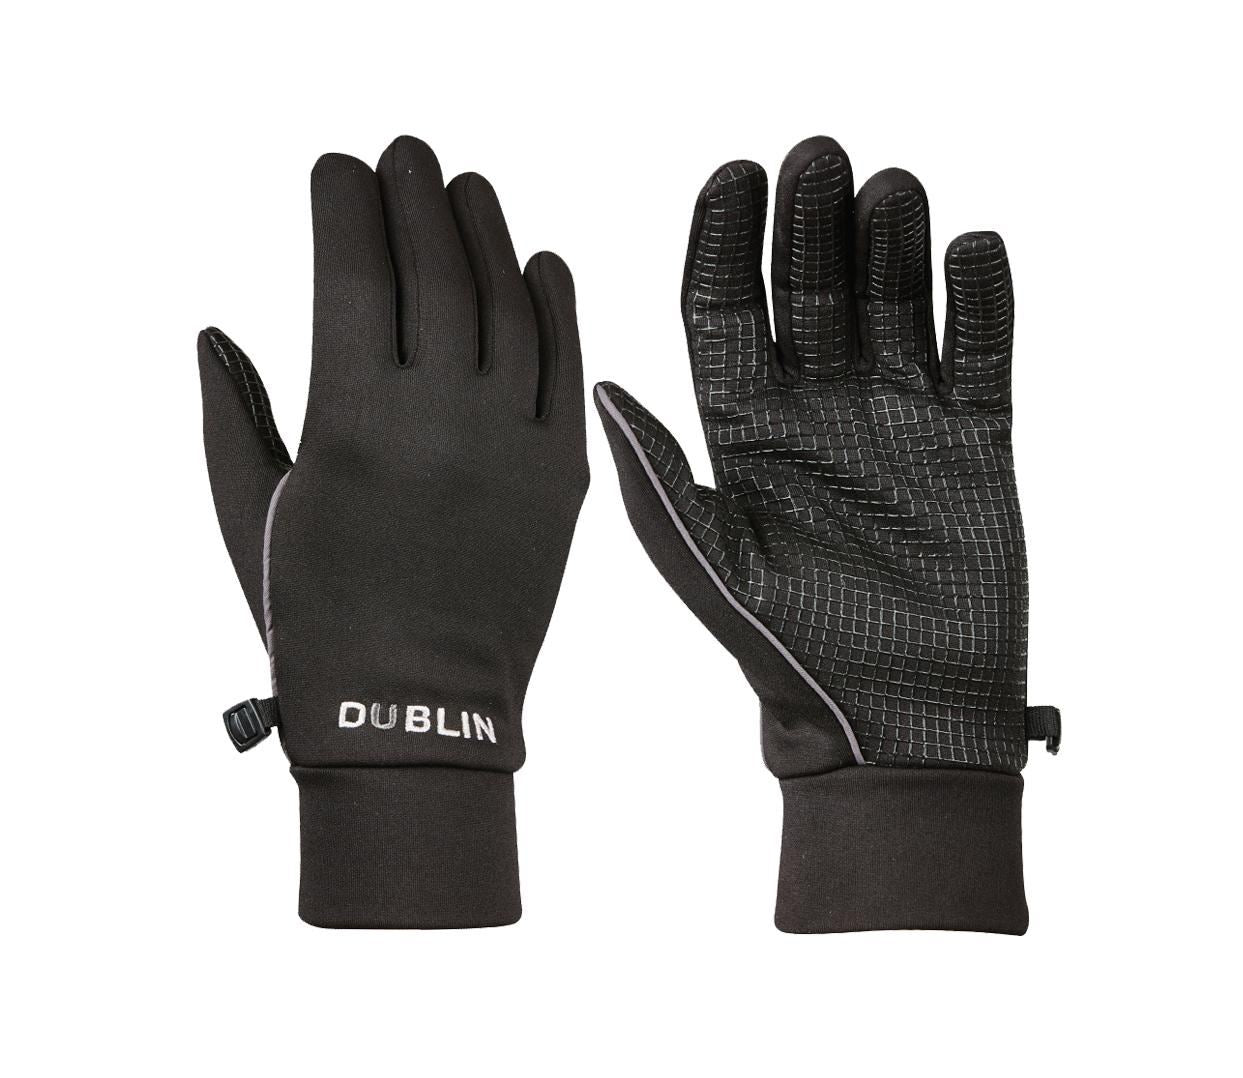 Dublin Thermal Horse Riding Gloves - Just Horse Riders